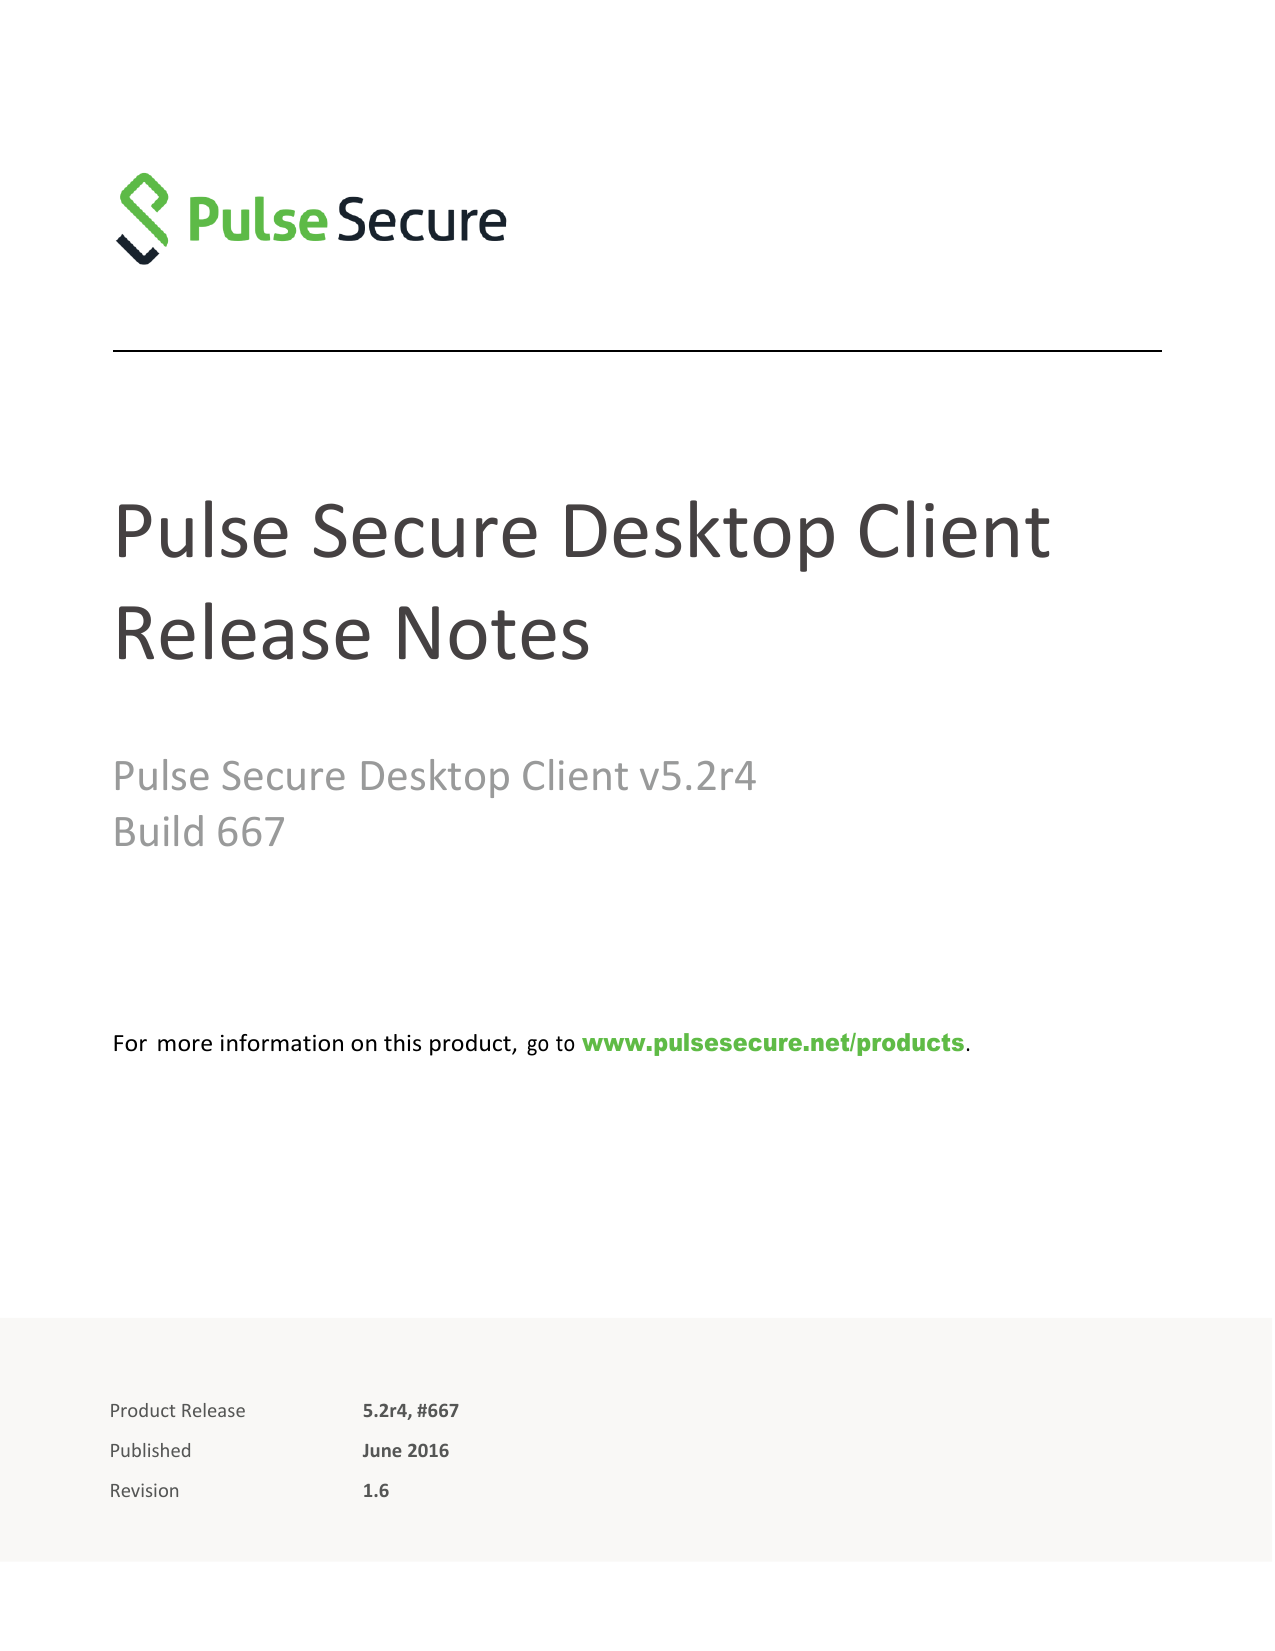 pulse secure release notes